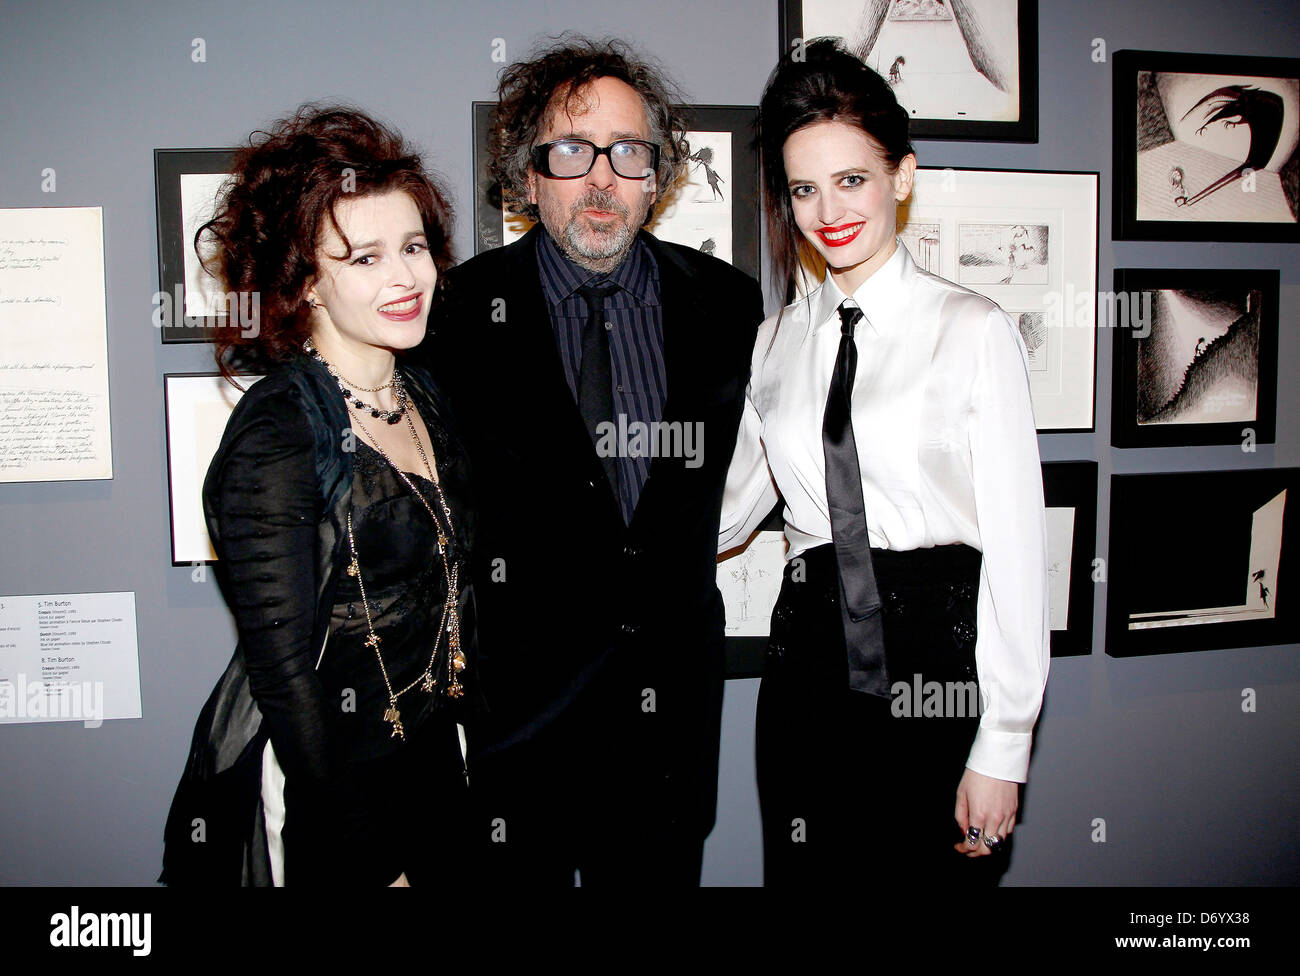 hænge deform salon Helena Bonham Carter, Tim Burton and Eva Green at the opening of the new Tim  Burton Exhibition at the Cinematheque francaise - Cinema Museum in Paris,  France on March 3, 2012. The